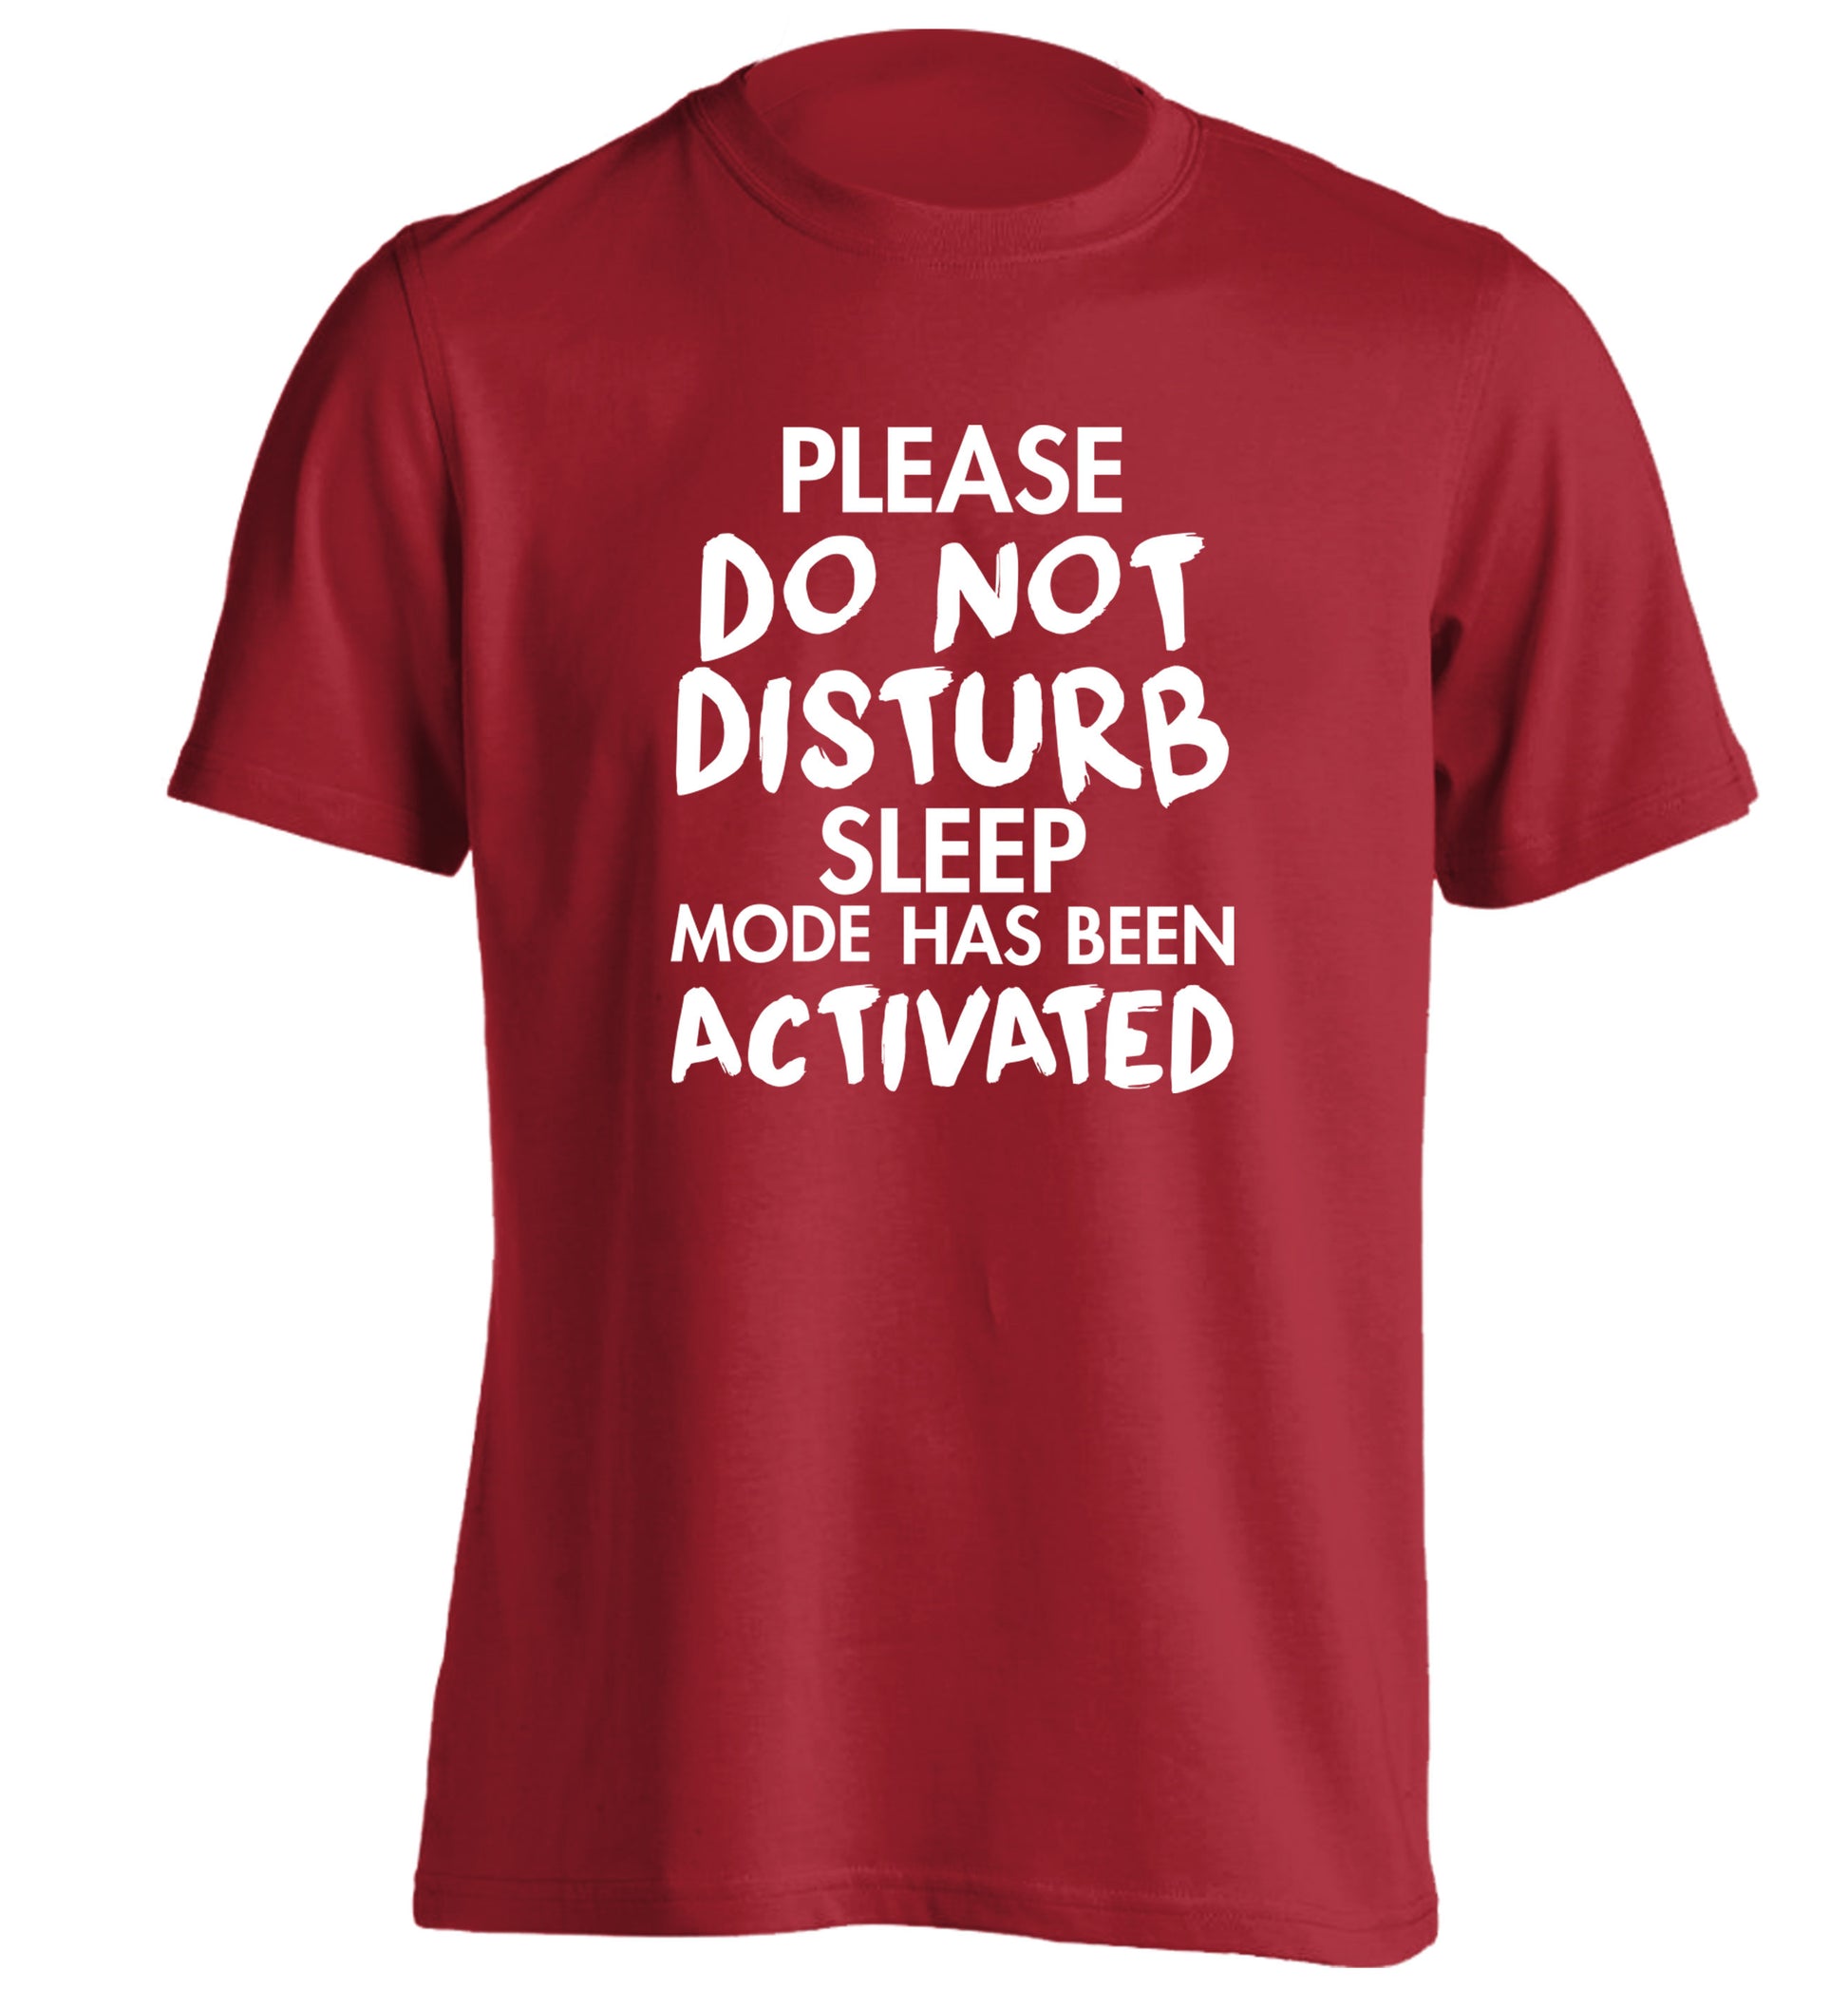 Please do not disturb sleeping mode has been activated adults unisex red Tshirt 2XL